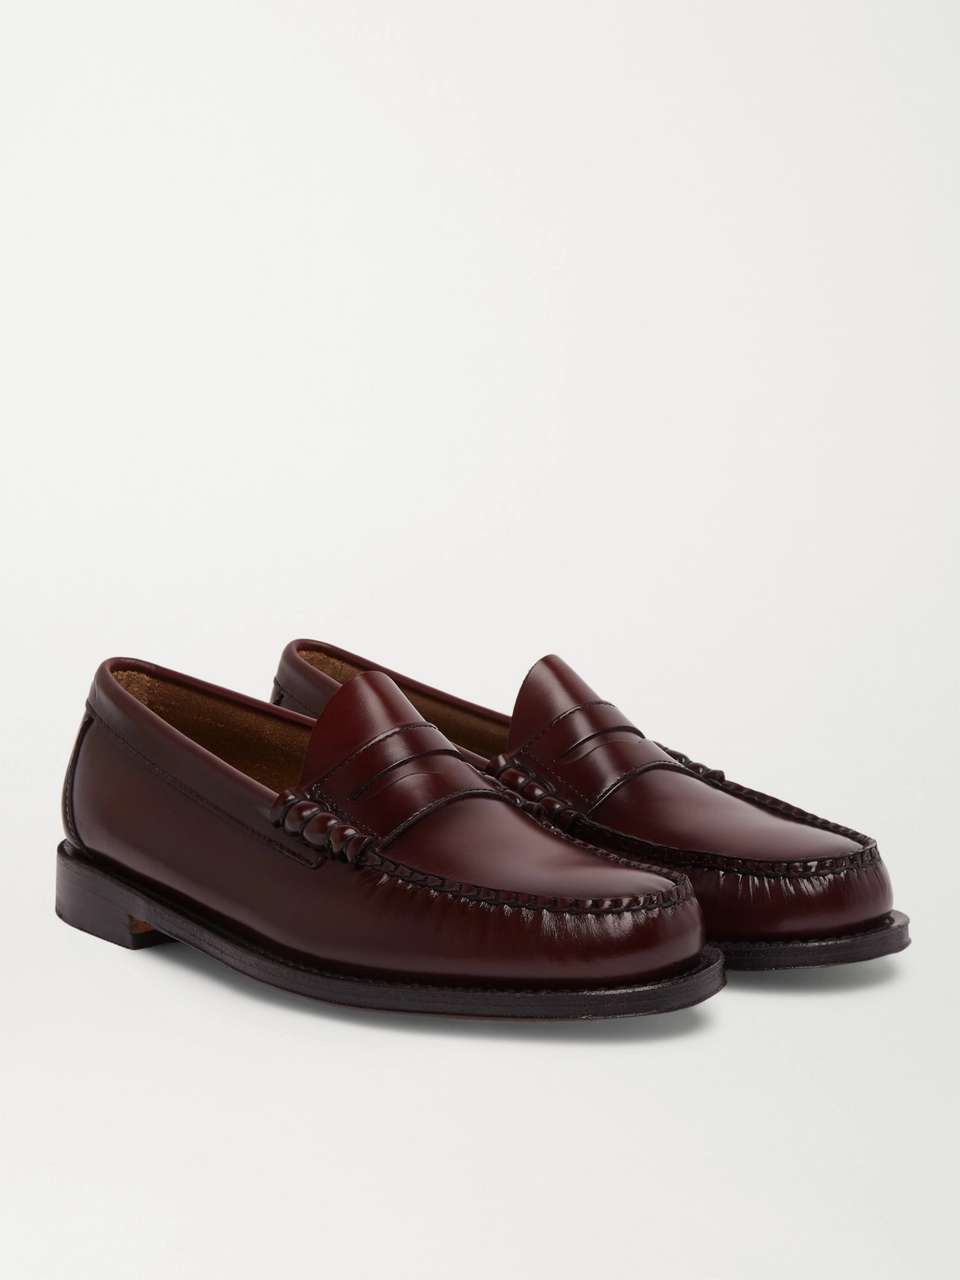 Burgundy Weejuns Heritage Larson Leather Penny Loafers | G.H. BASS & CO ...